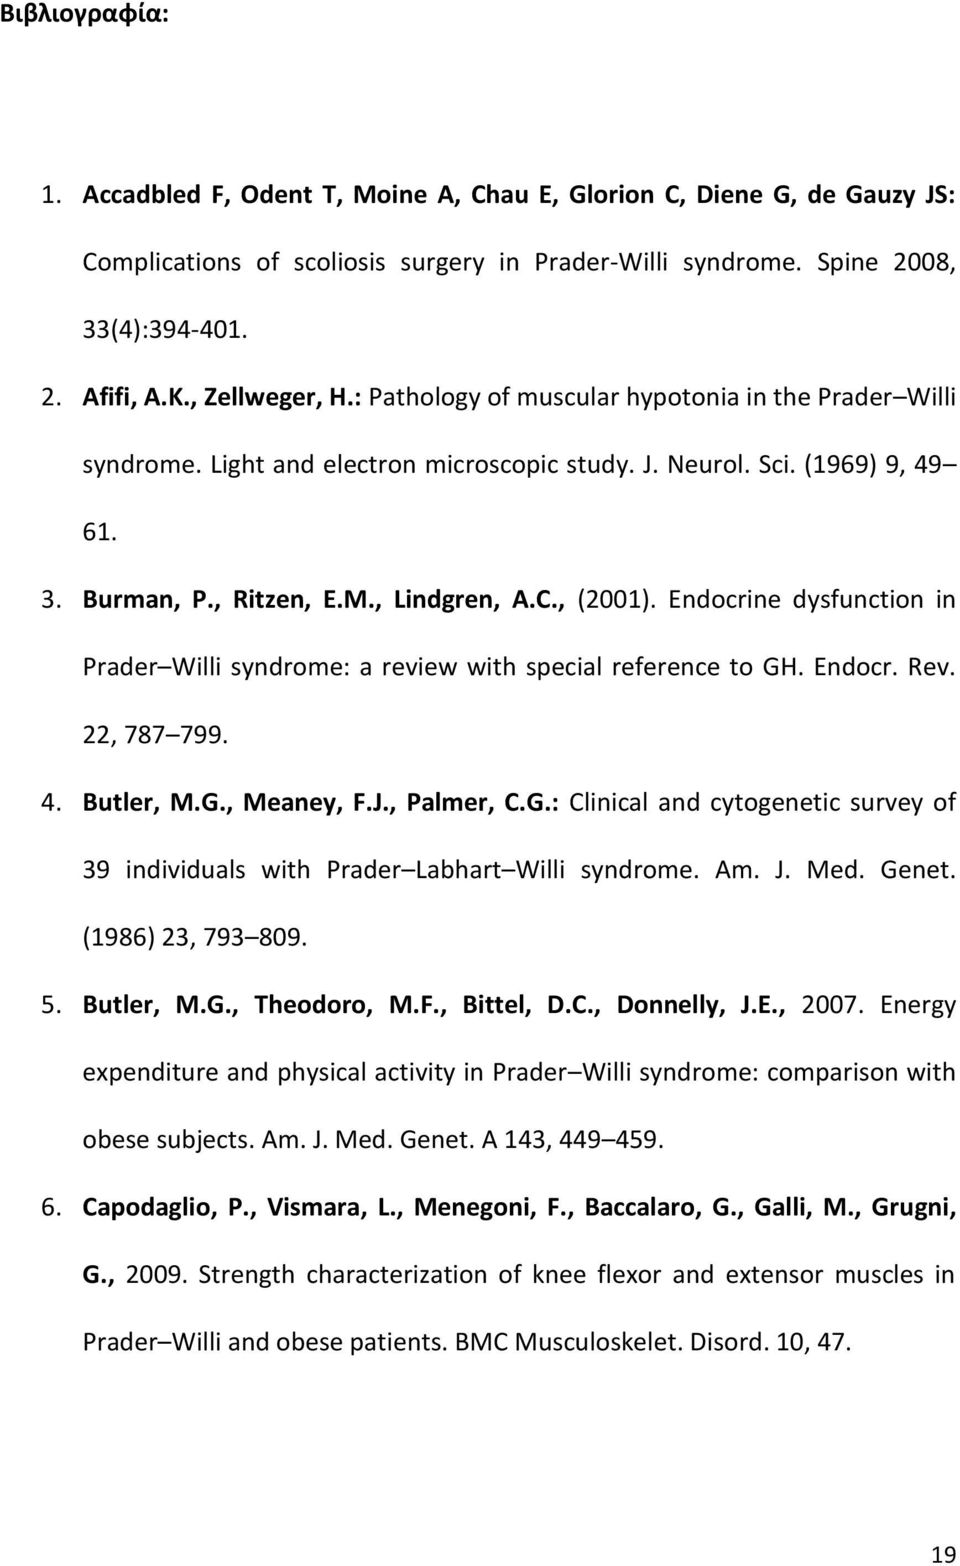 , (2001). Endocrine dysfunction in Prader Willi syndrome: a review with special reference to GH. Endocr. Rev. 22, 787 799. 4. Butler, M.G., Meaney, F.J., Palmer, C.G.: Clinical and cytogenetic survey of 39 individuals with Prader Labhart Willi syndrome.